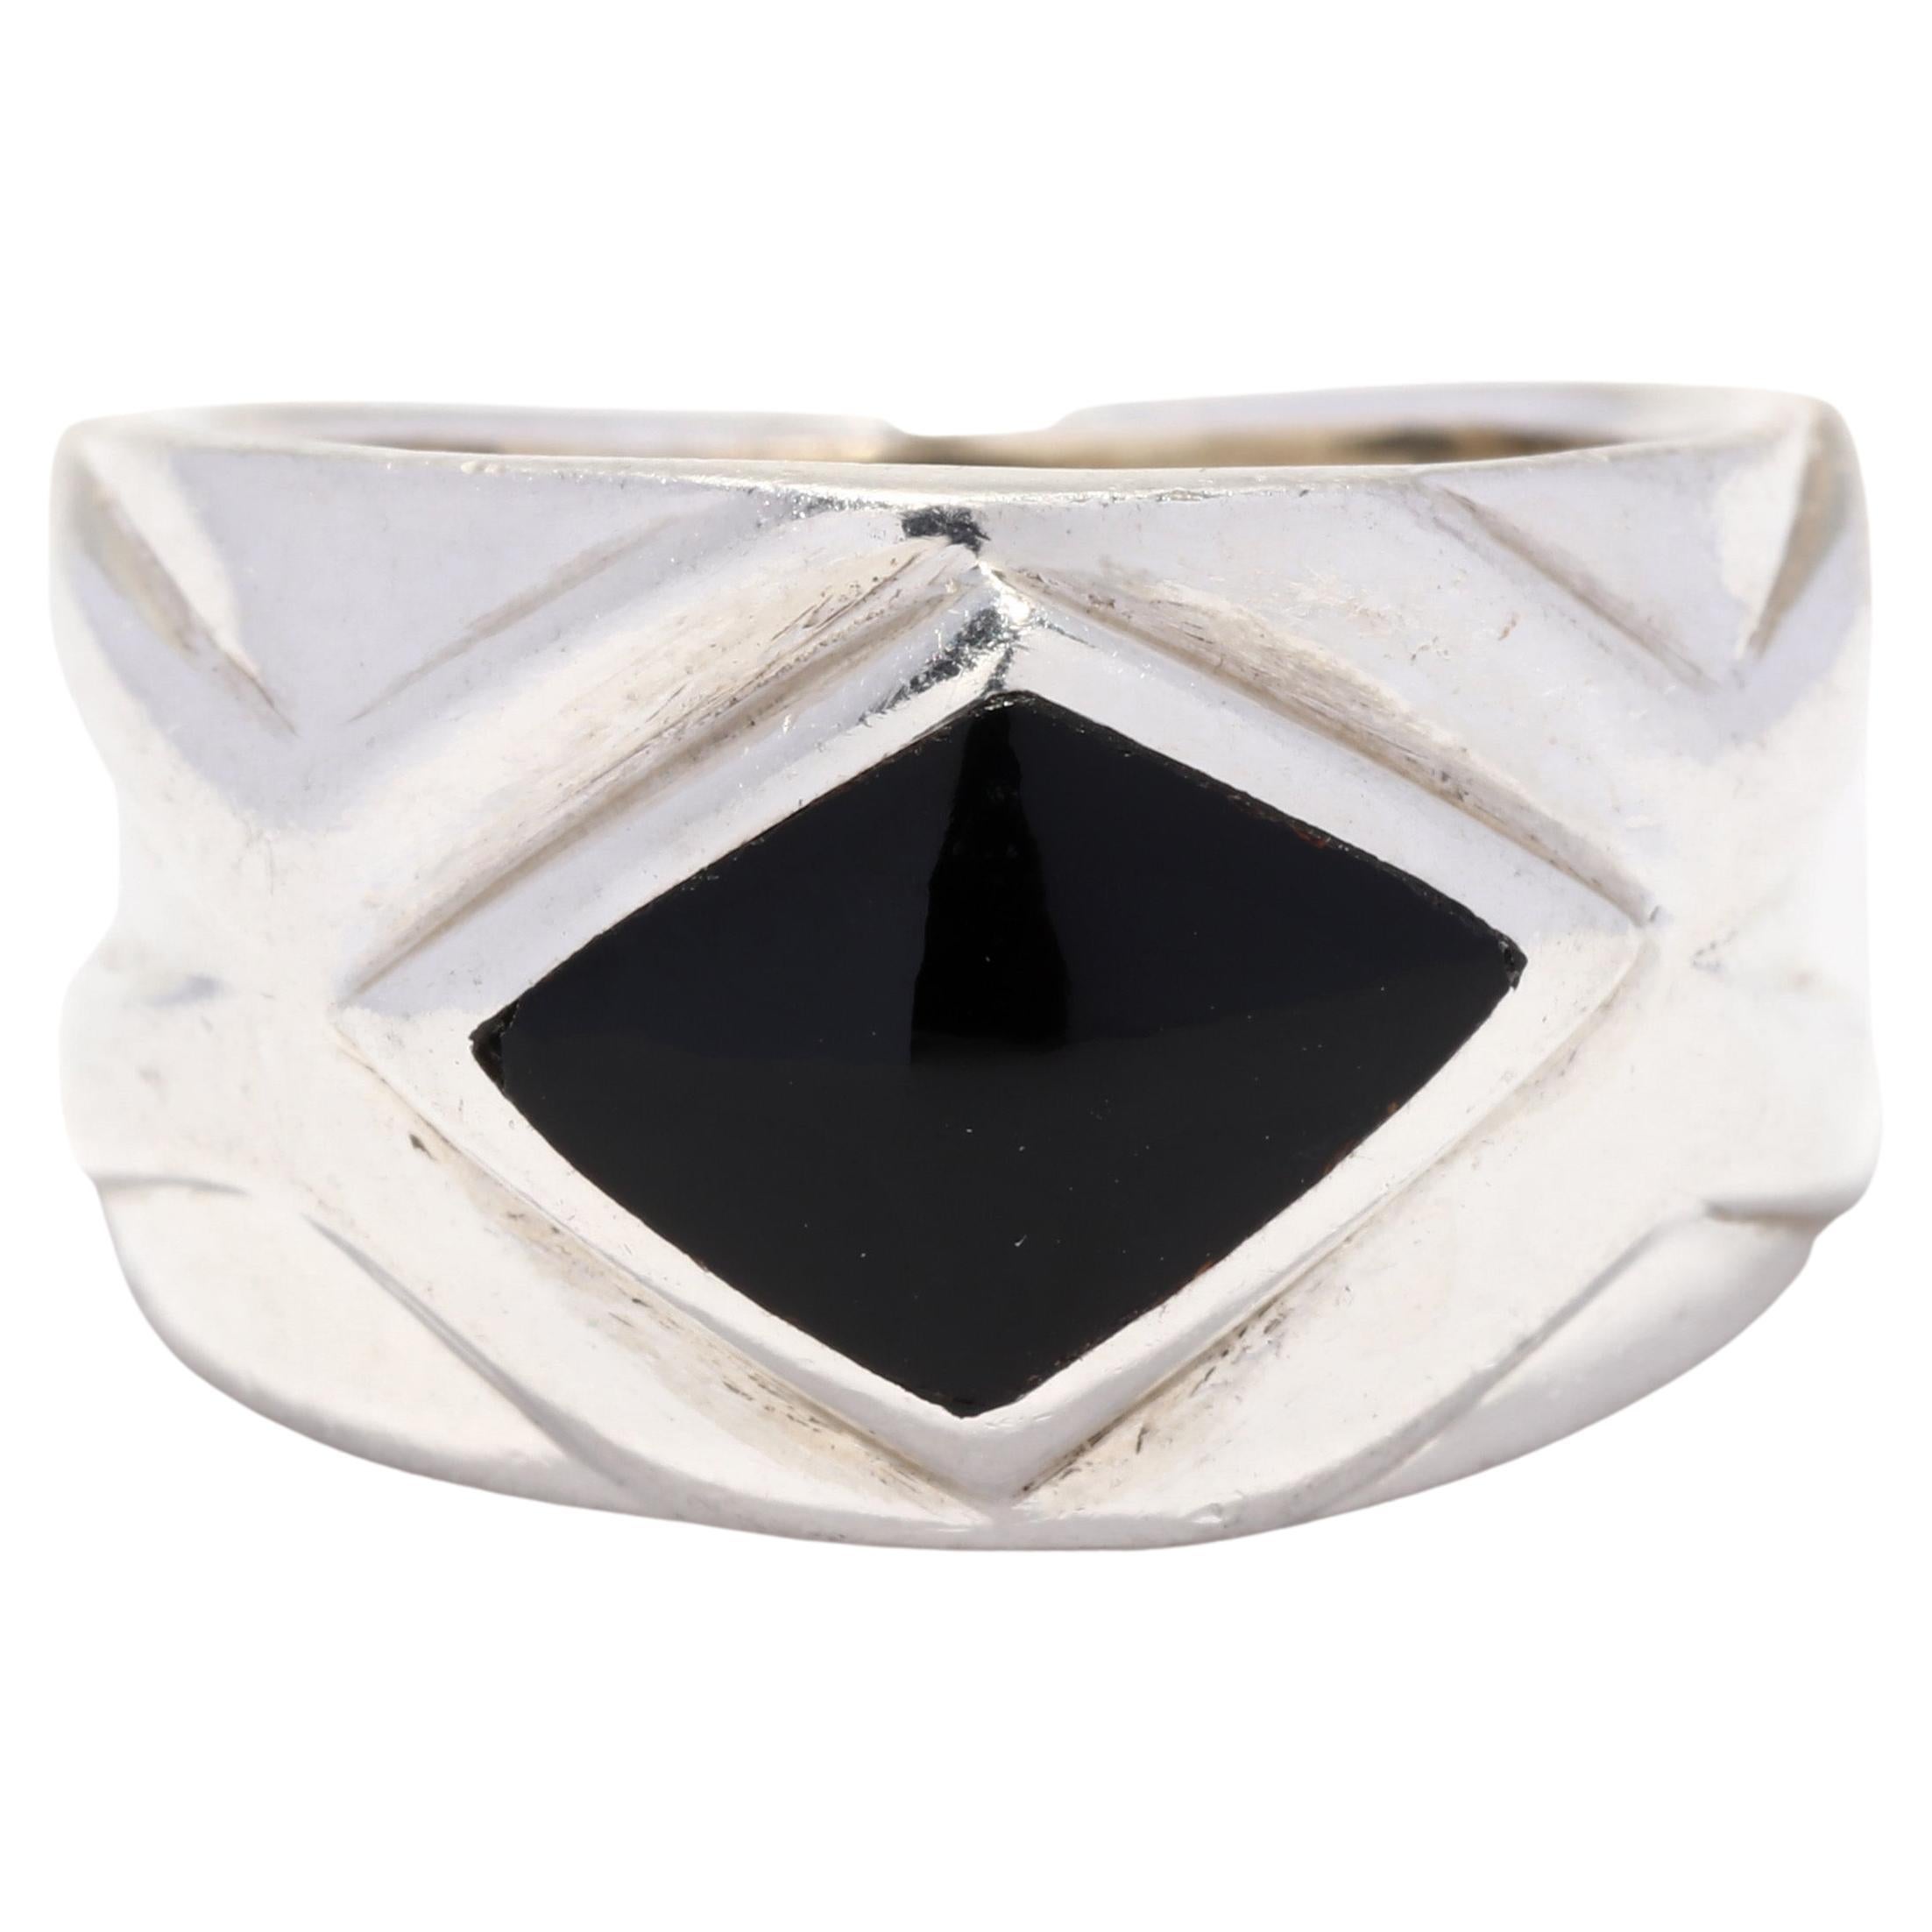 How can I tell if black onyx is real?